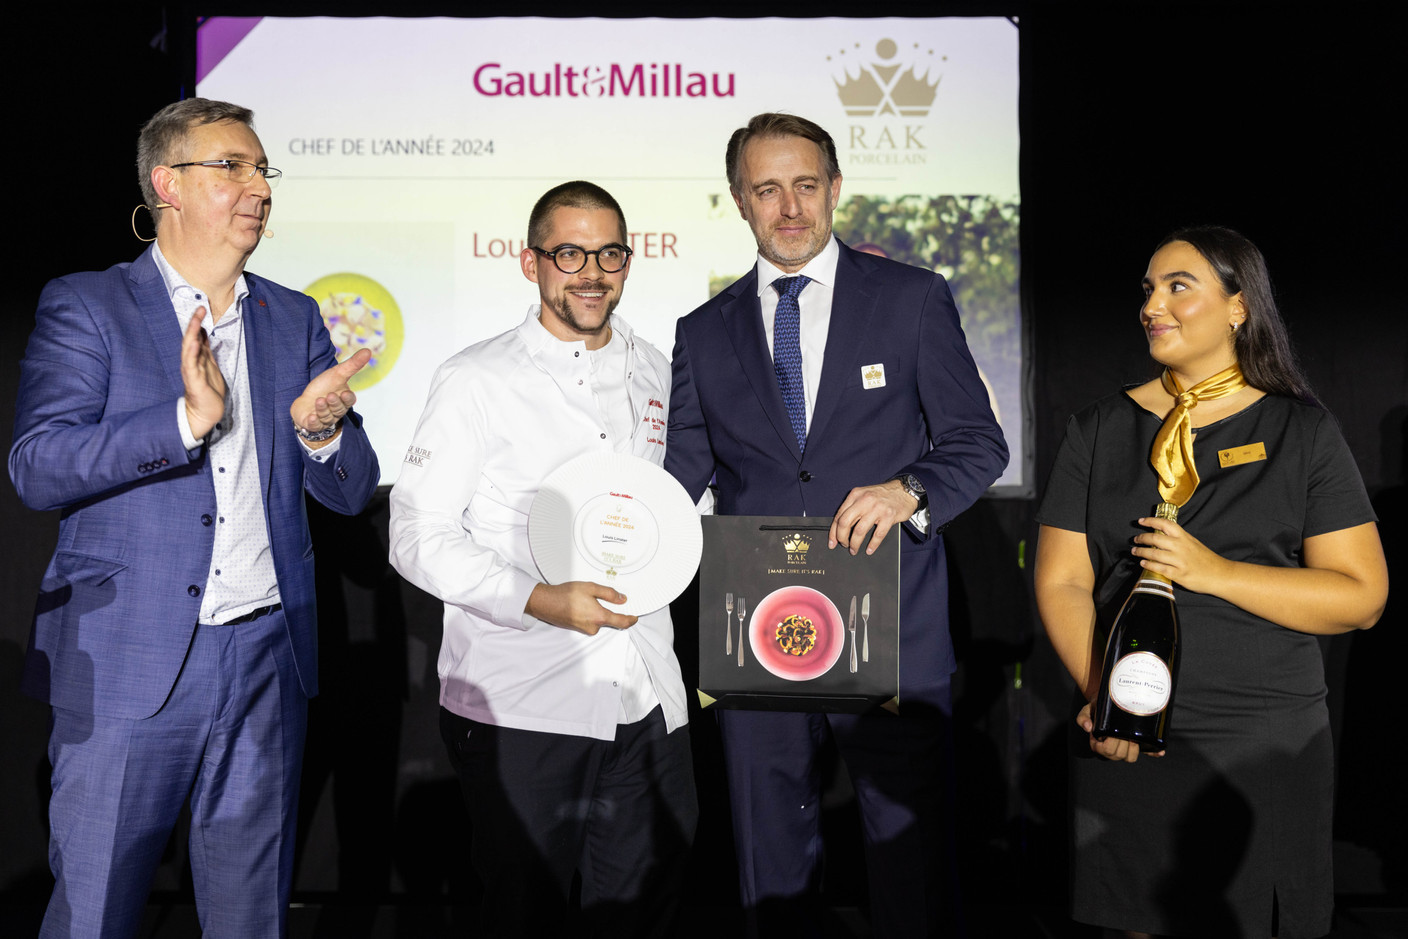 On the left, Laurent Fery (country director Gault & Millau Luxembourg) had this to say about Louis Linster’s restaurant: “As only a great chef can offer great emotions, we didn’t hesitate to go there several times.” Photo: Romain Gamba / Maison Moderne